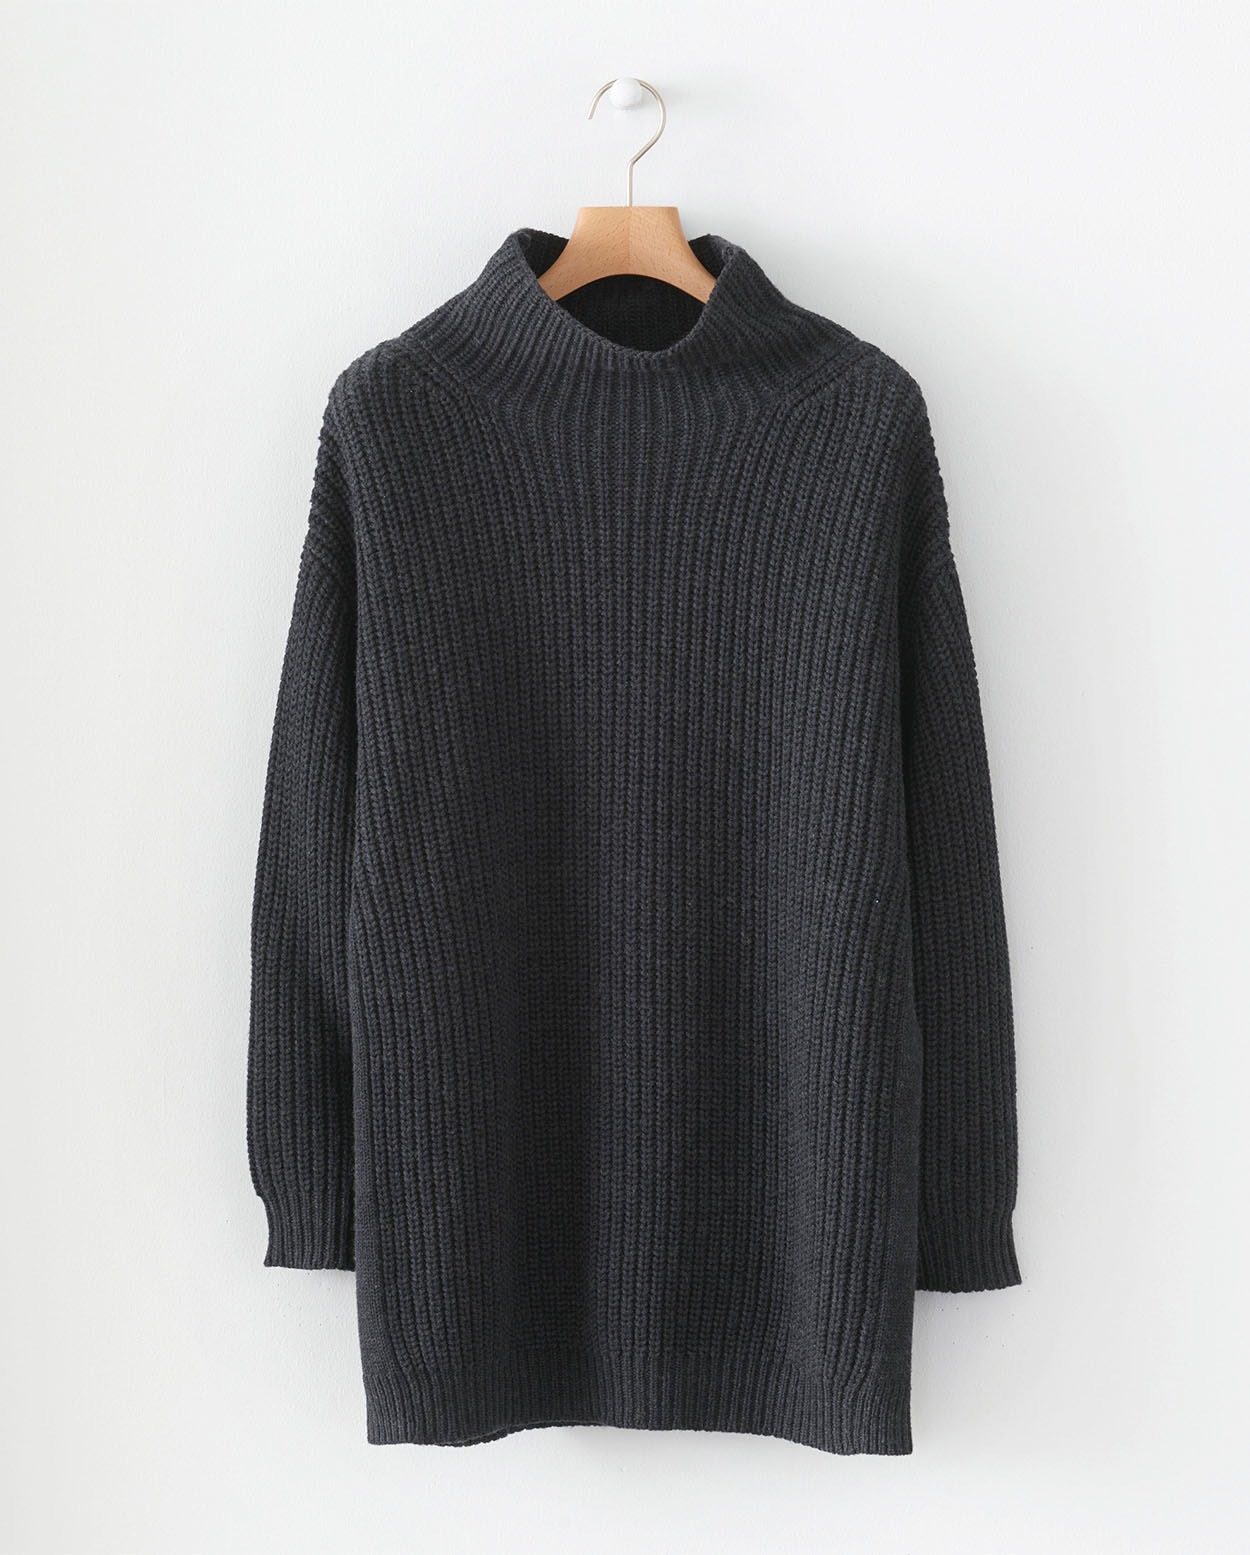 Poetry - Oversized cotton and wool sweater